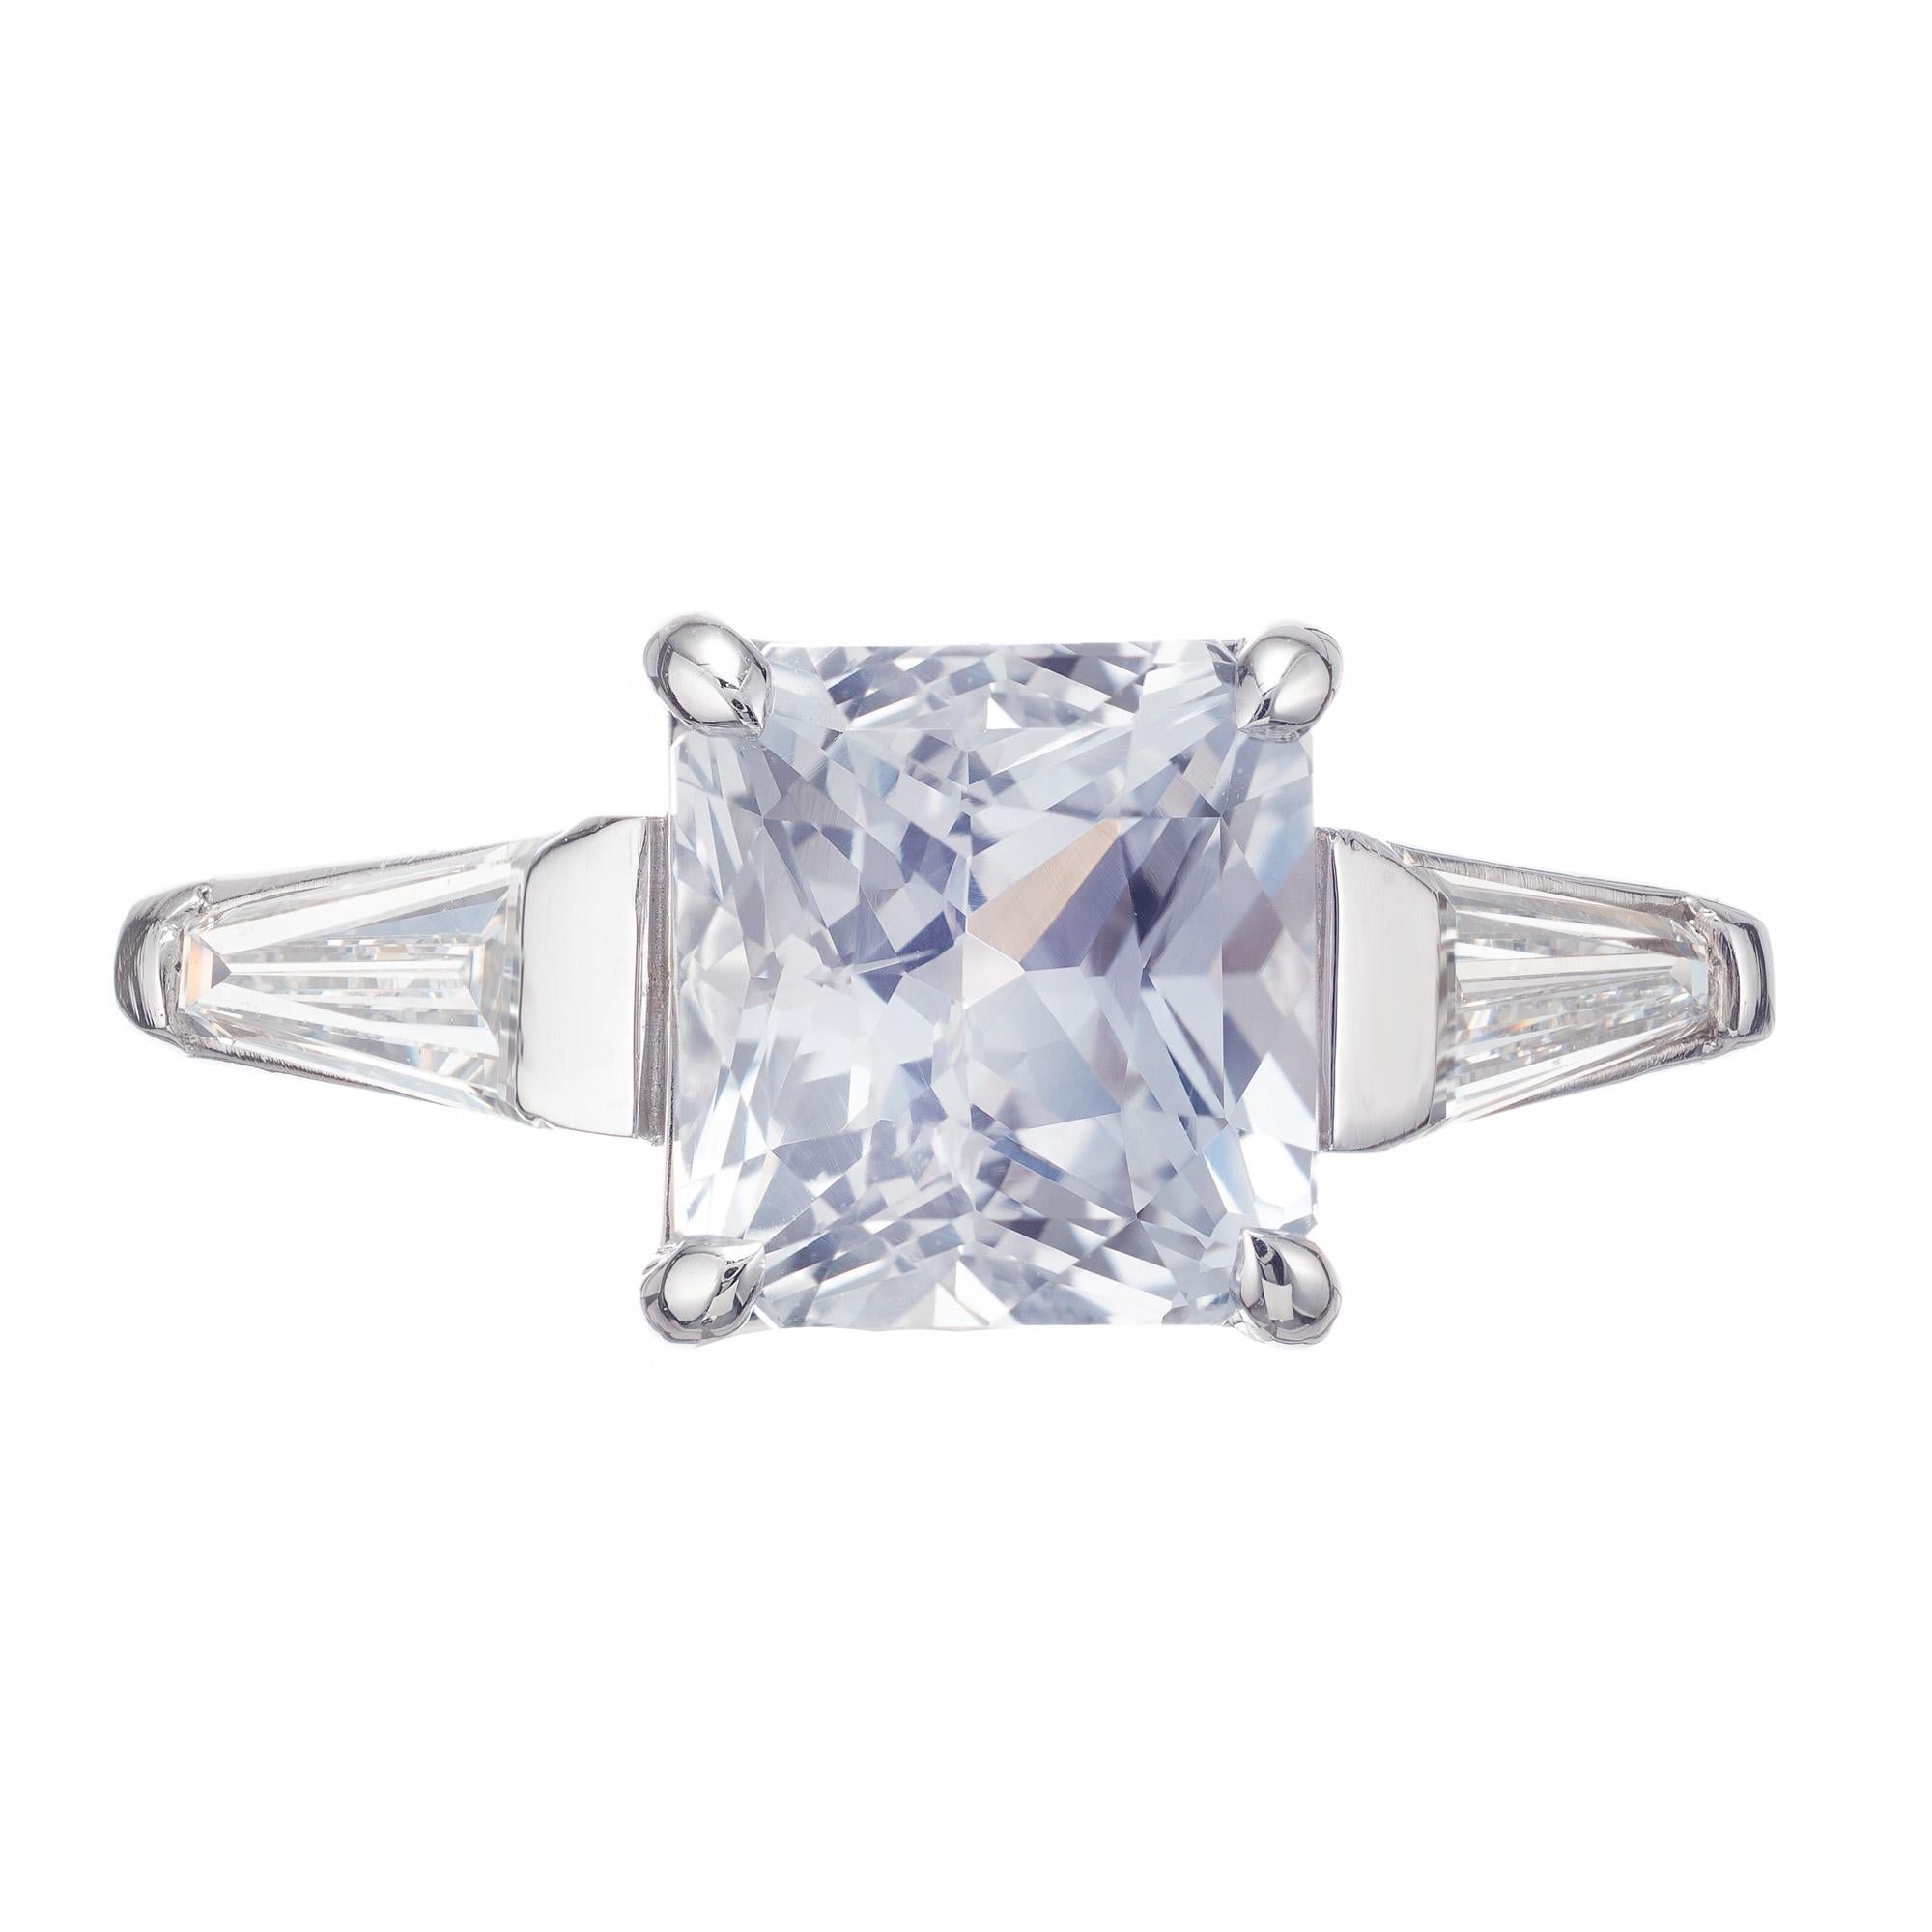 Octagonal sapphire and diamond three-stone engagement ring. The GIA certified center stone is from a 1930's estate. The platinum setting has two tapered baguette side diamonds and was crafted in the Peter Suchy Workshop.

1 octagonal white-near